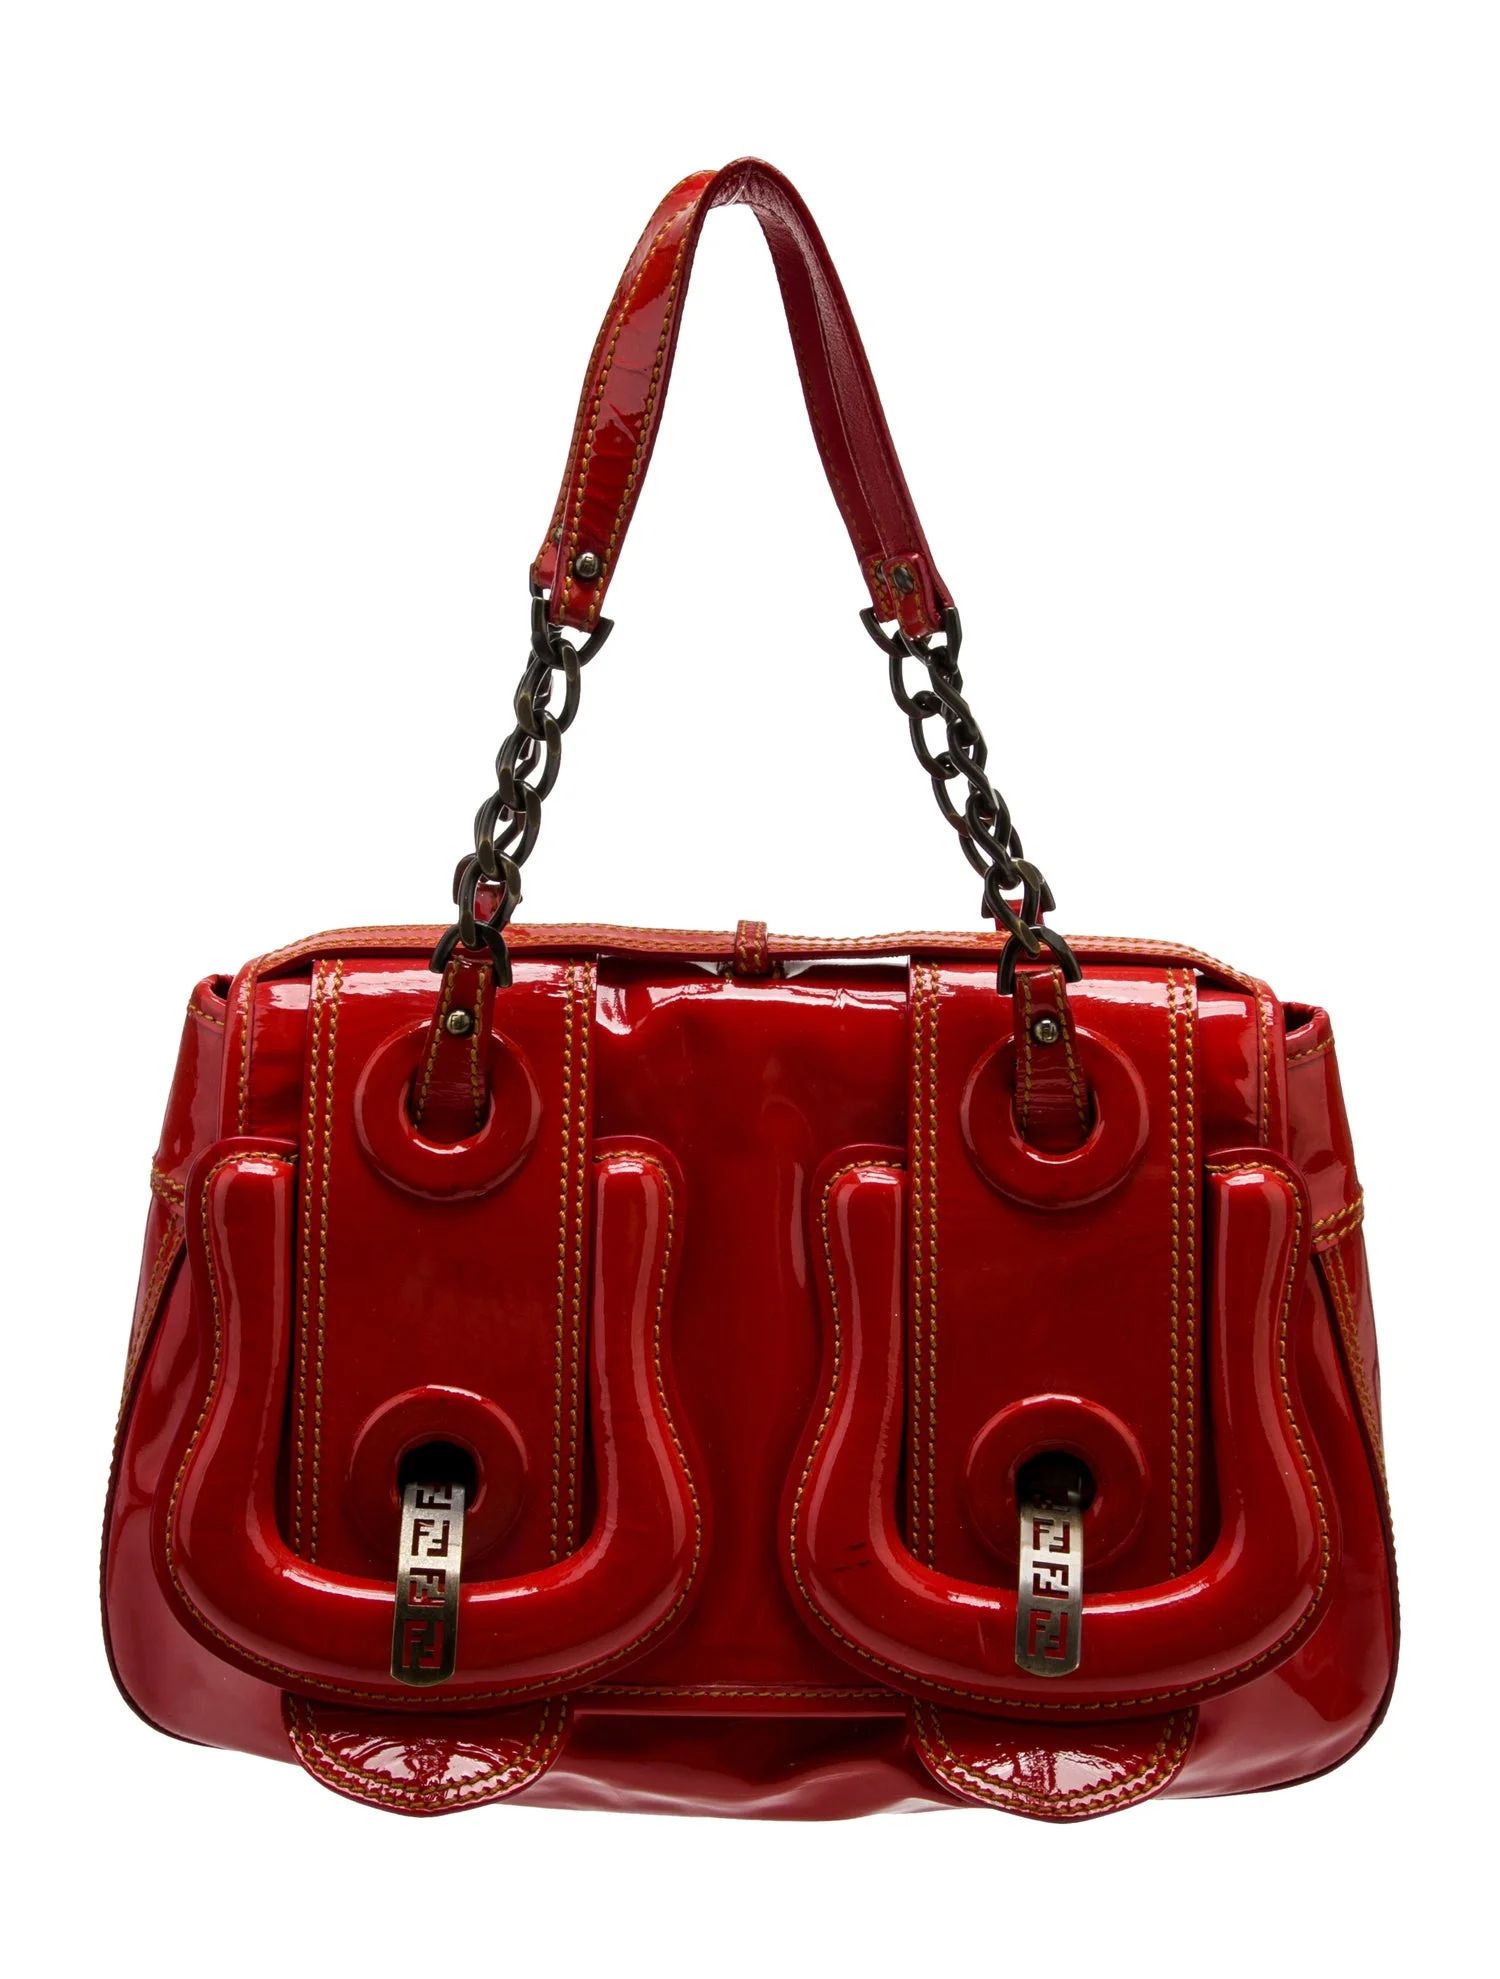 Patent Leather B. Bag | The RealReal